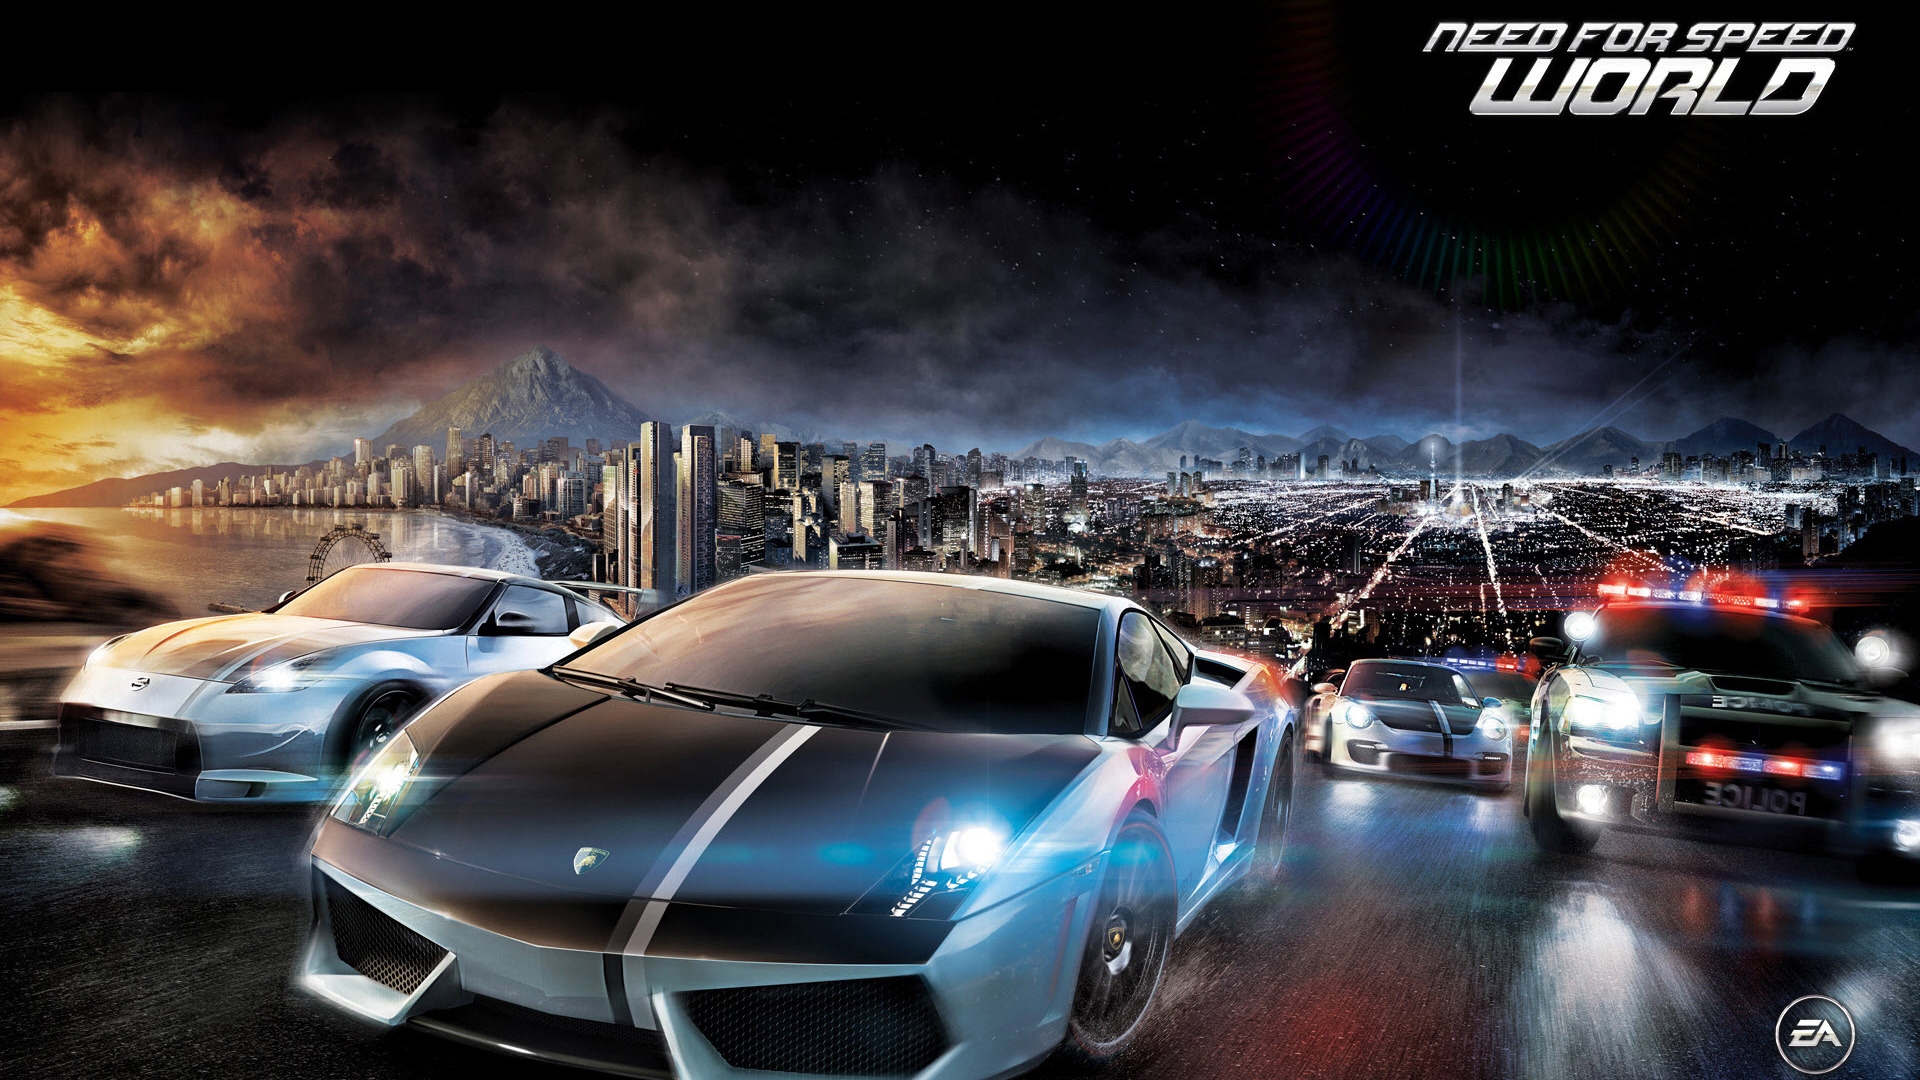 Need for Speed World for 1920 x 1080 HDTV 1080p resolution